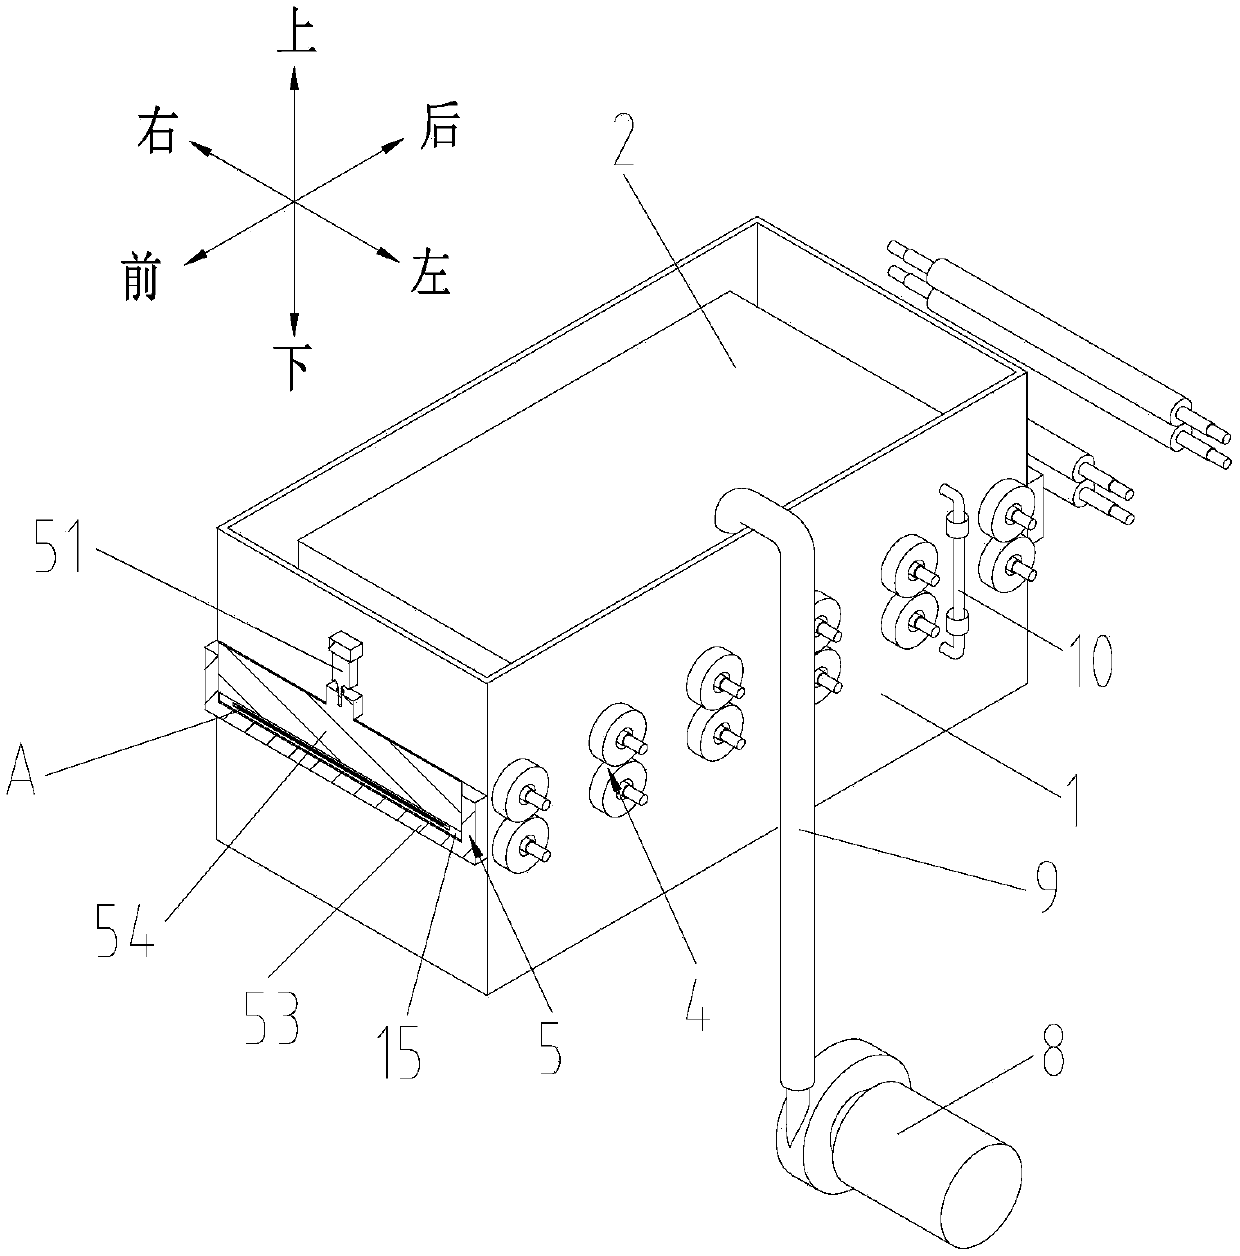 Continuous ultrasonic cleaning device